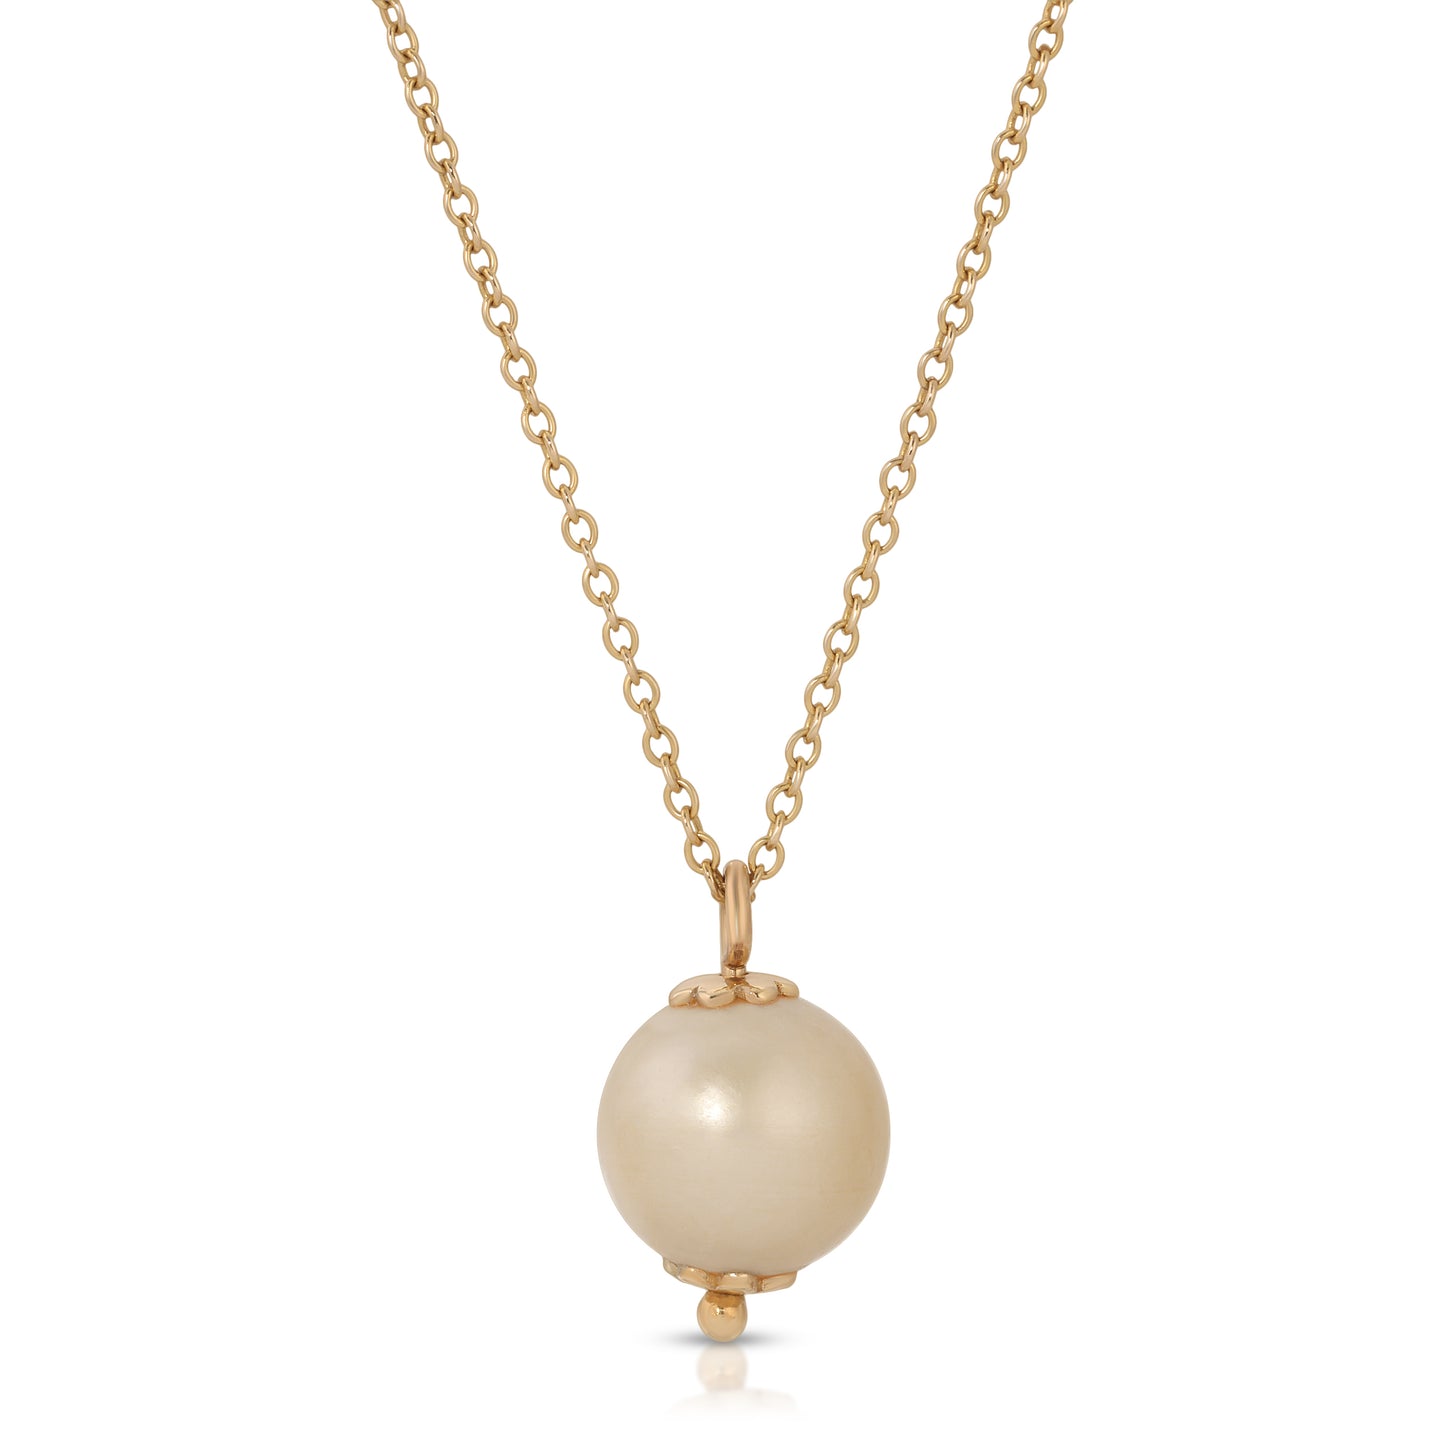 18K solid gold golden south sea pearl pendant on gold chain from the wandering jewel